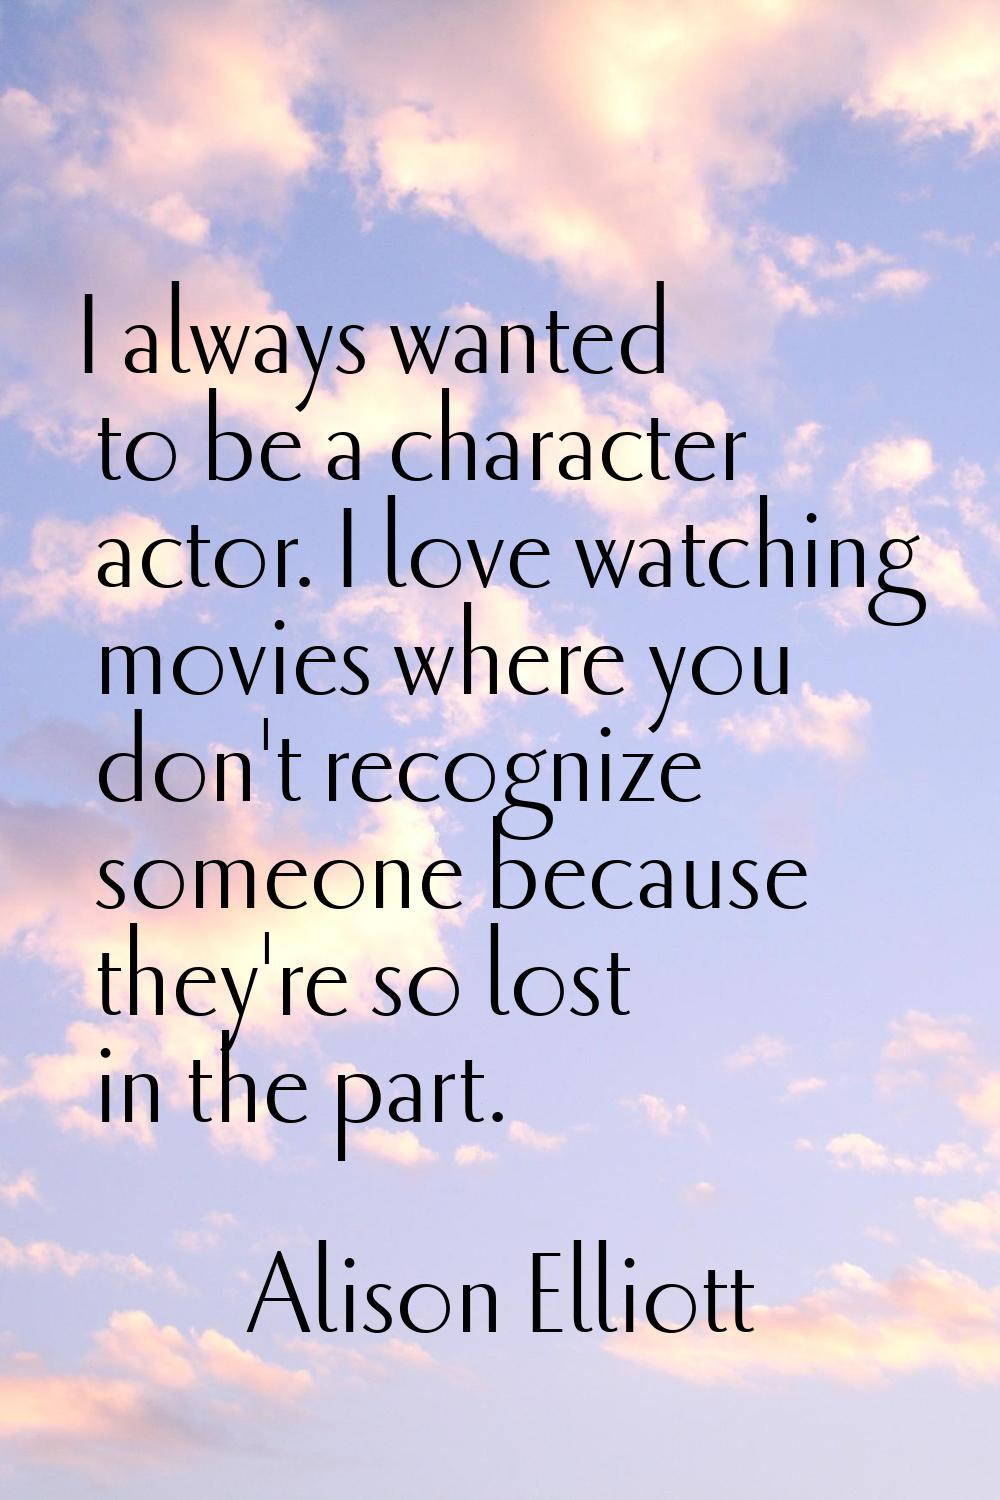 I always wanted to be a character actor. I love watching movies where you don't recognize someone b